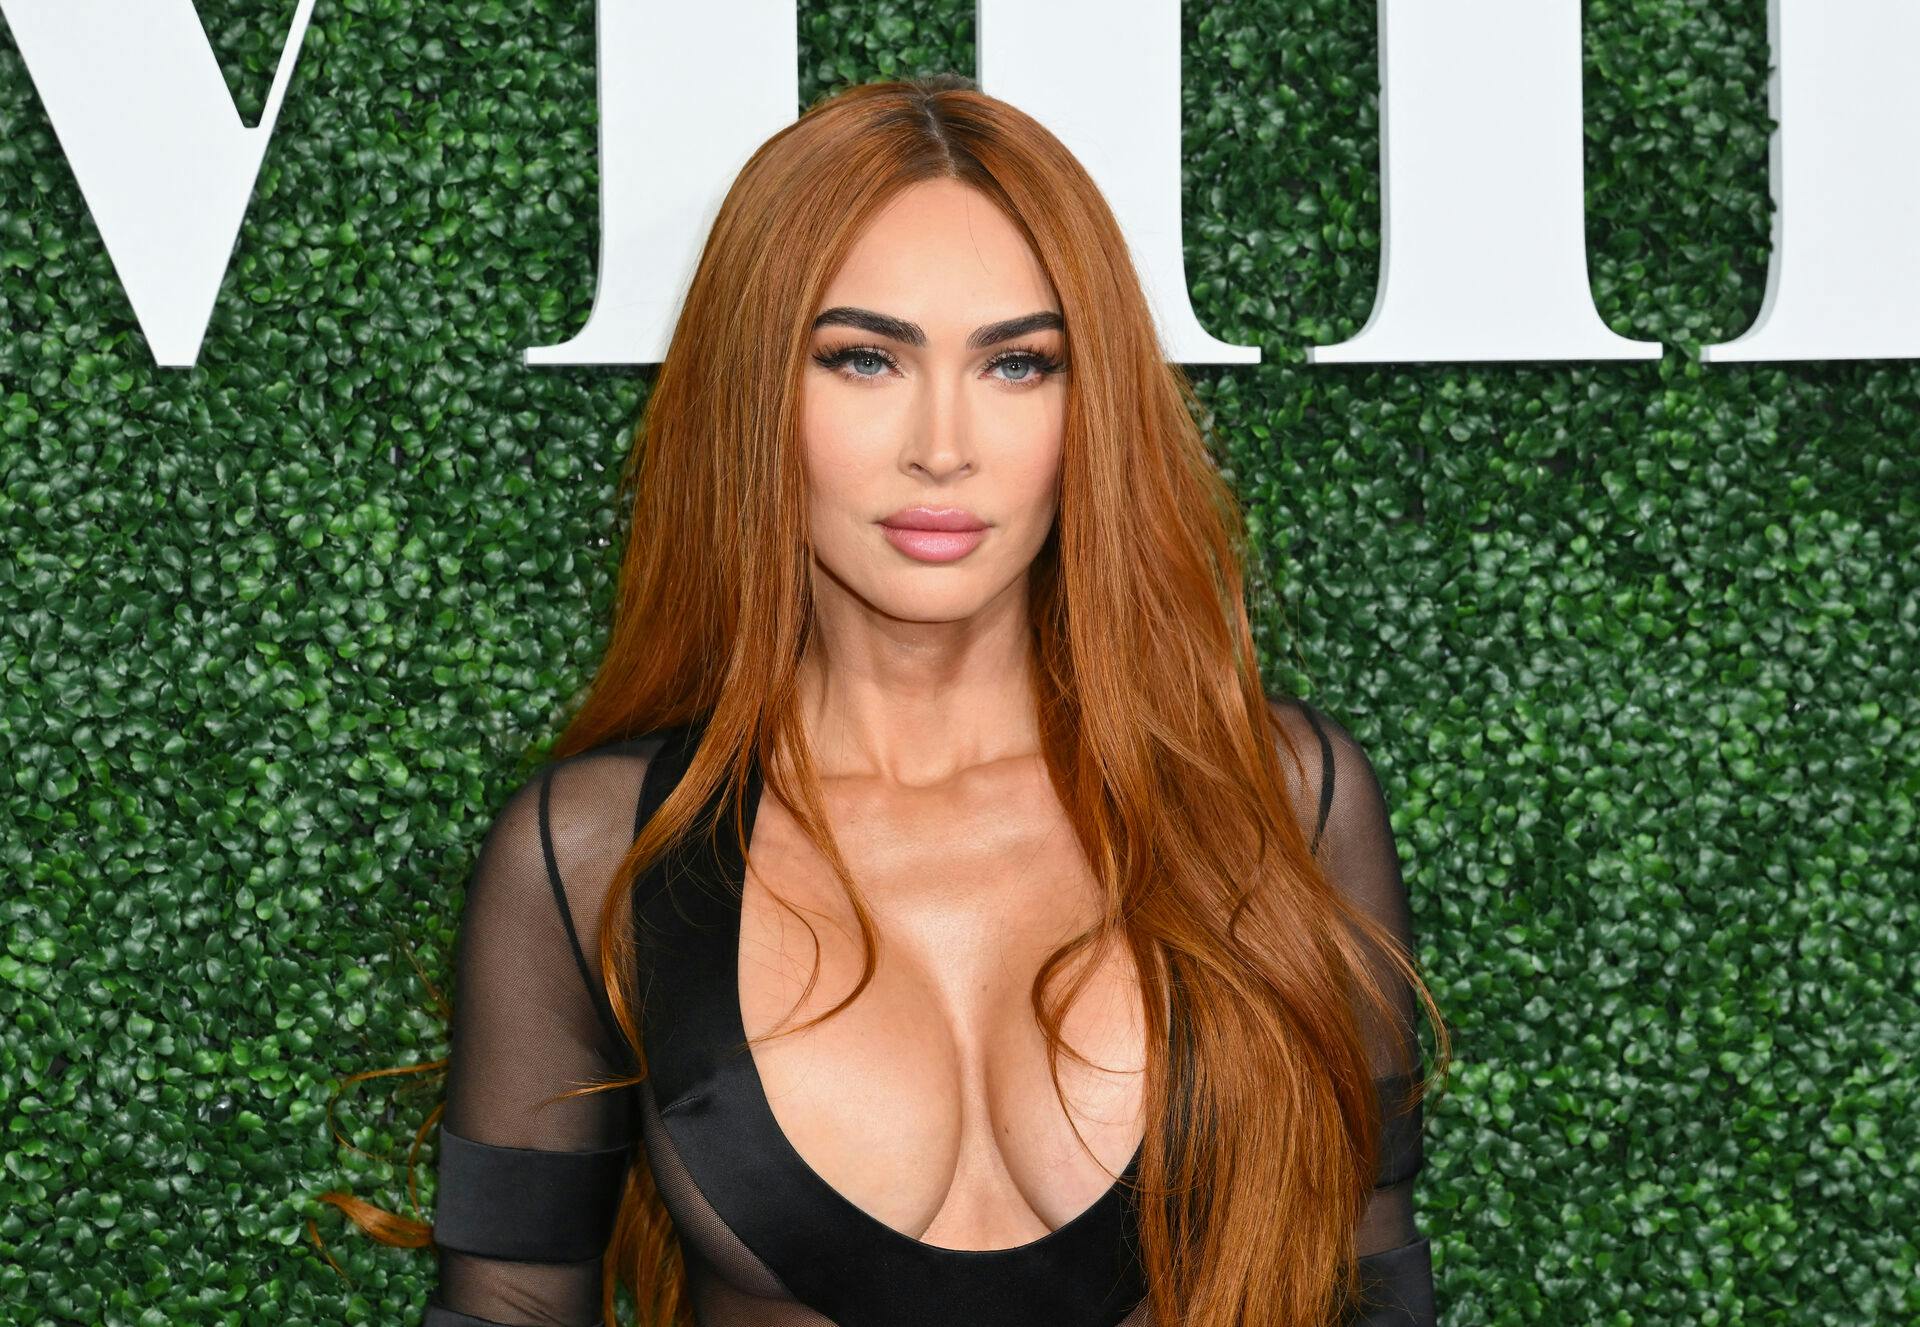 US actress Megan Fox arrives for the 2023 Sports Illustrated swimsuit issue launch party at Hard Rock Hotel Times Square in New York City on May 18, 2023. ANGELA WEISS / AFP